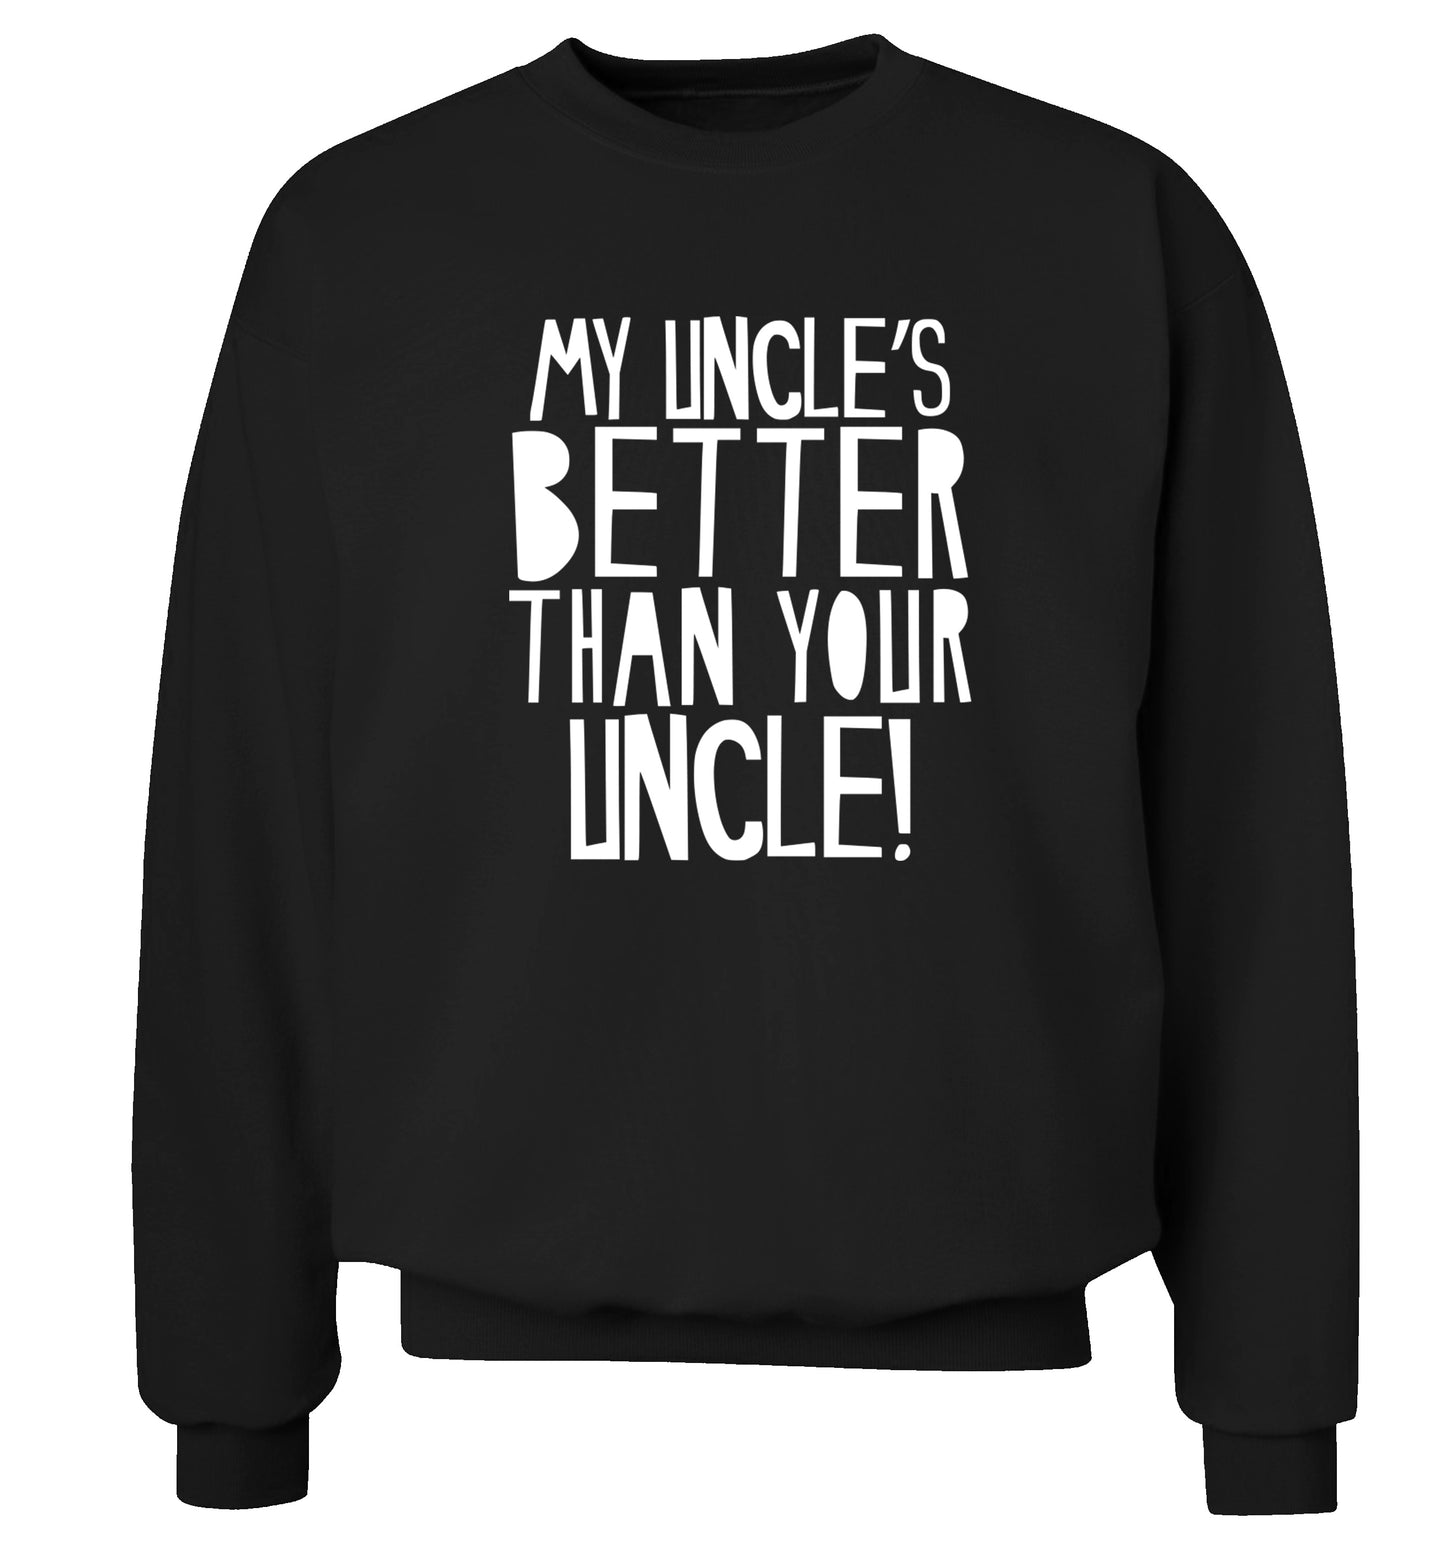 My uncles better than your uncle Adult's unisex black Sweater 2XL